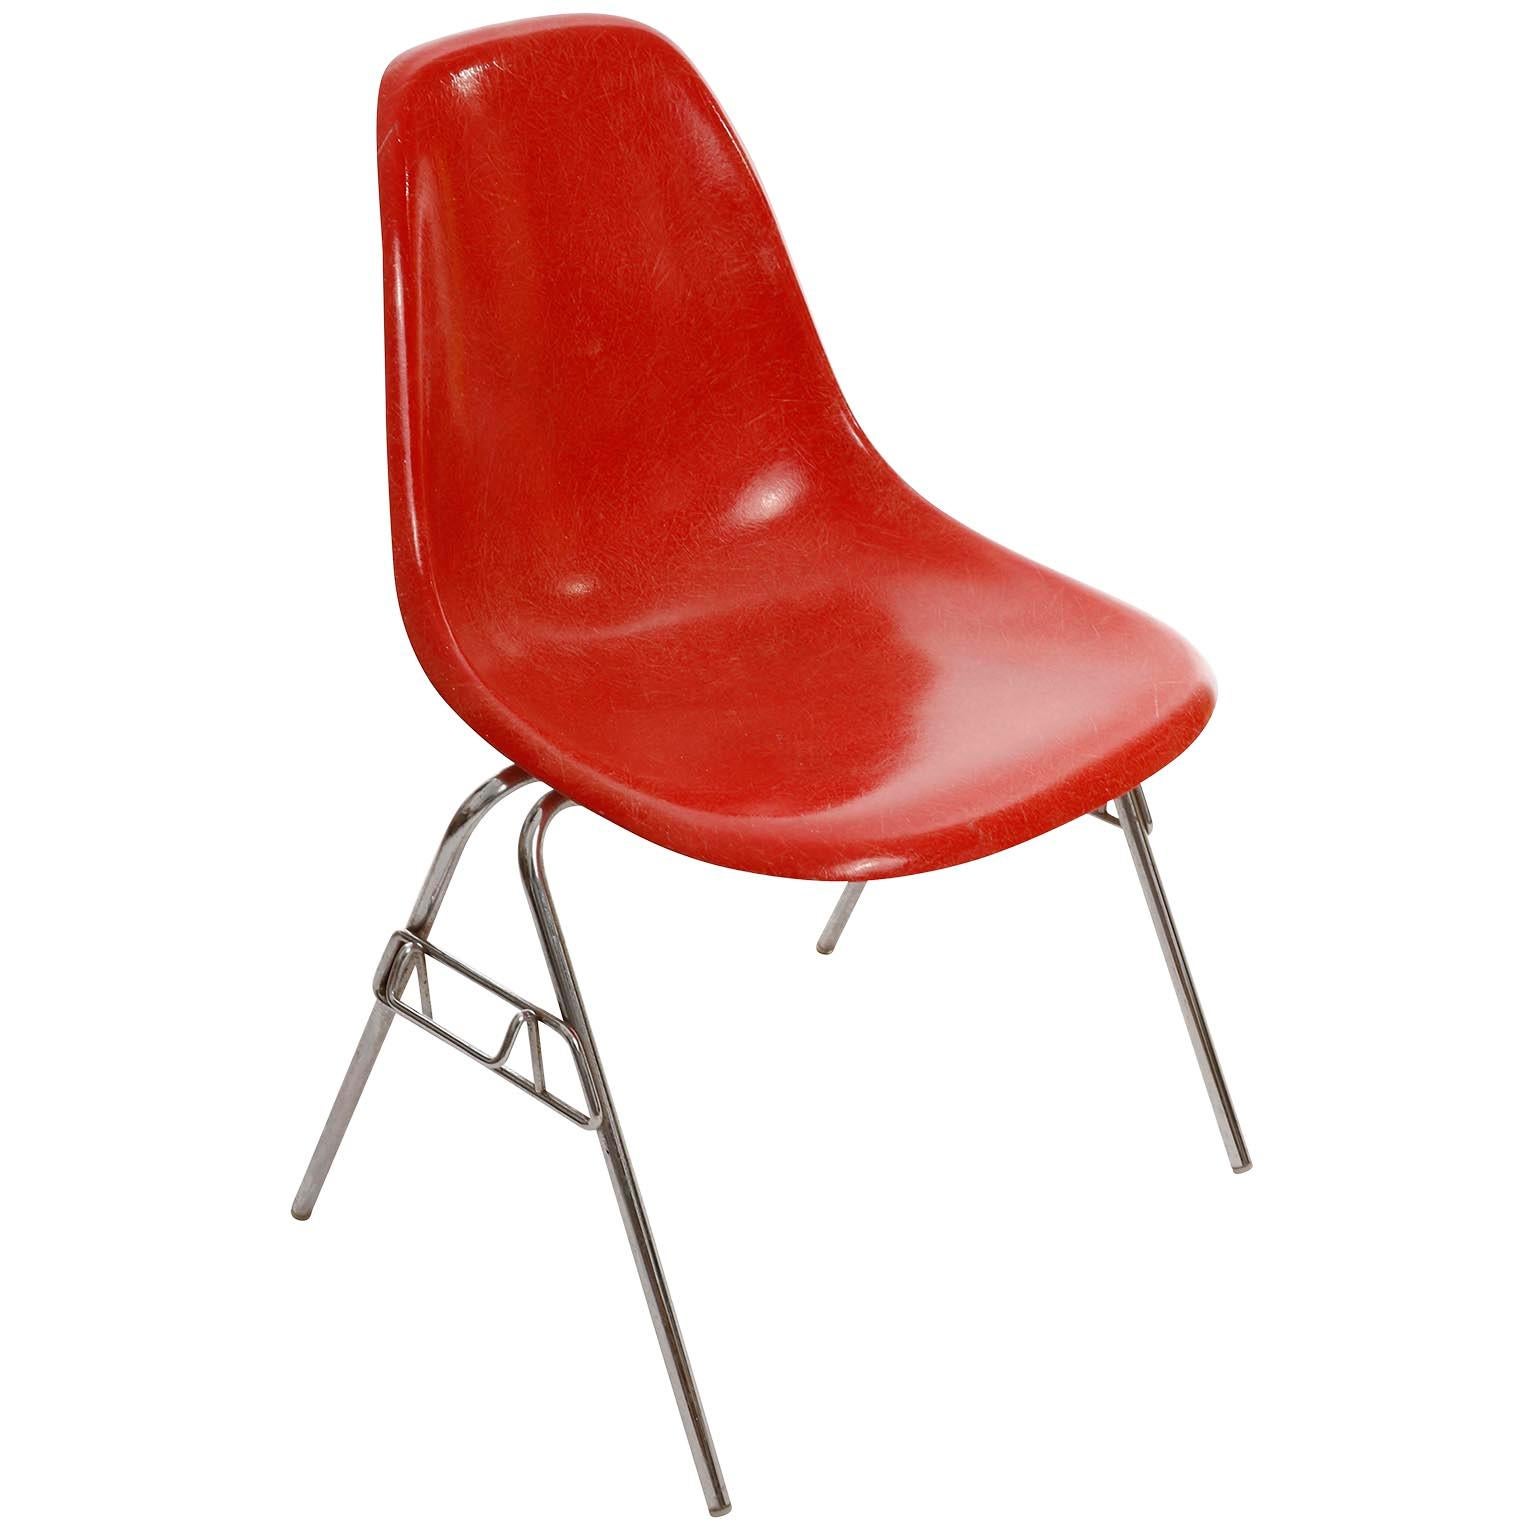 One of 22 stackable dining room chairs by Charles & Ray Eames for Herman Miller, manufactured in midcentury, 1974.
The chairs are labeled on the underside of the seats with 'herman miller' and stamped with 28. Nov. 1974.
A molded red fiberglass